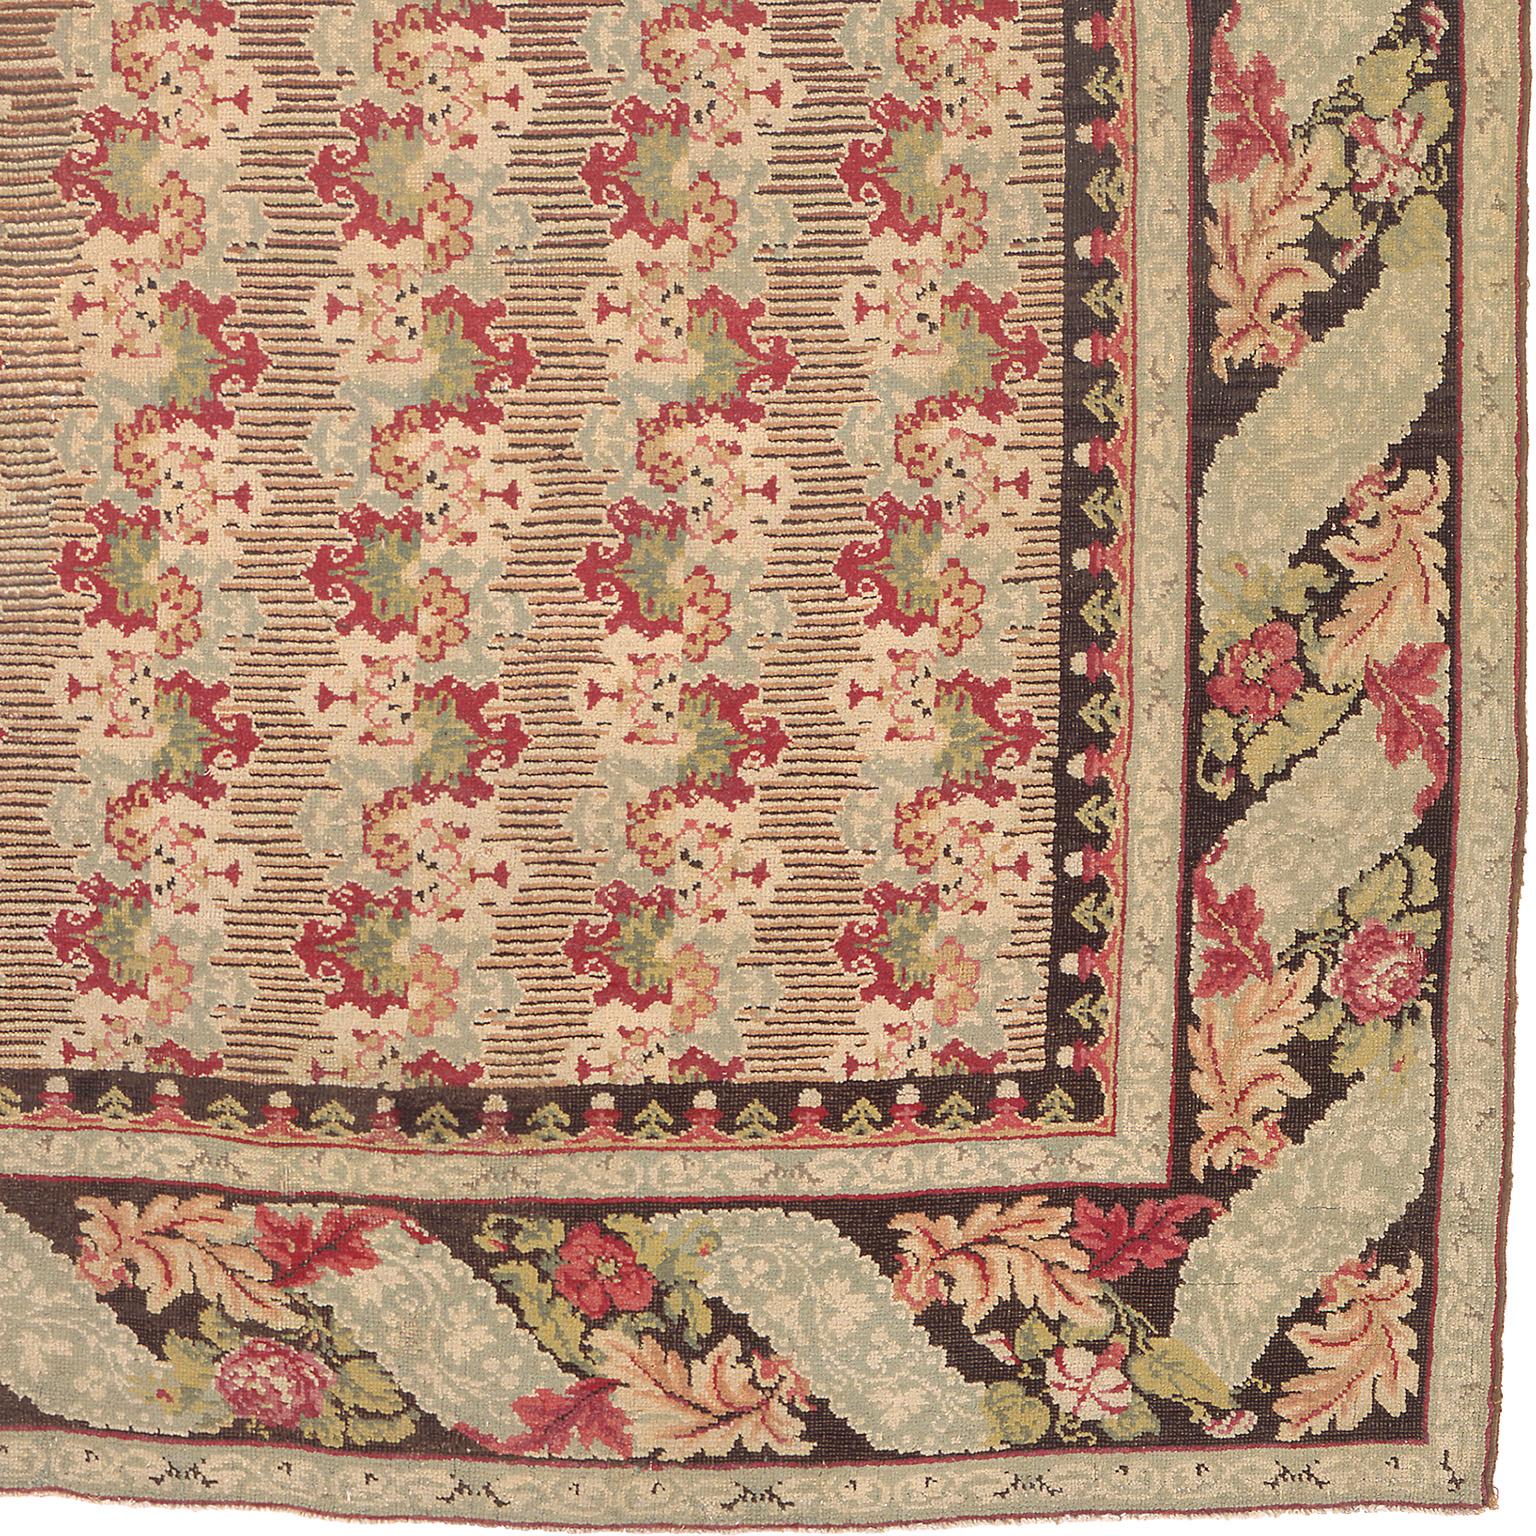 Mid-19th century Russian pile rug
USSR, circa 1840
Handwoven
Measures: 8'4